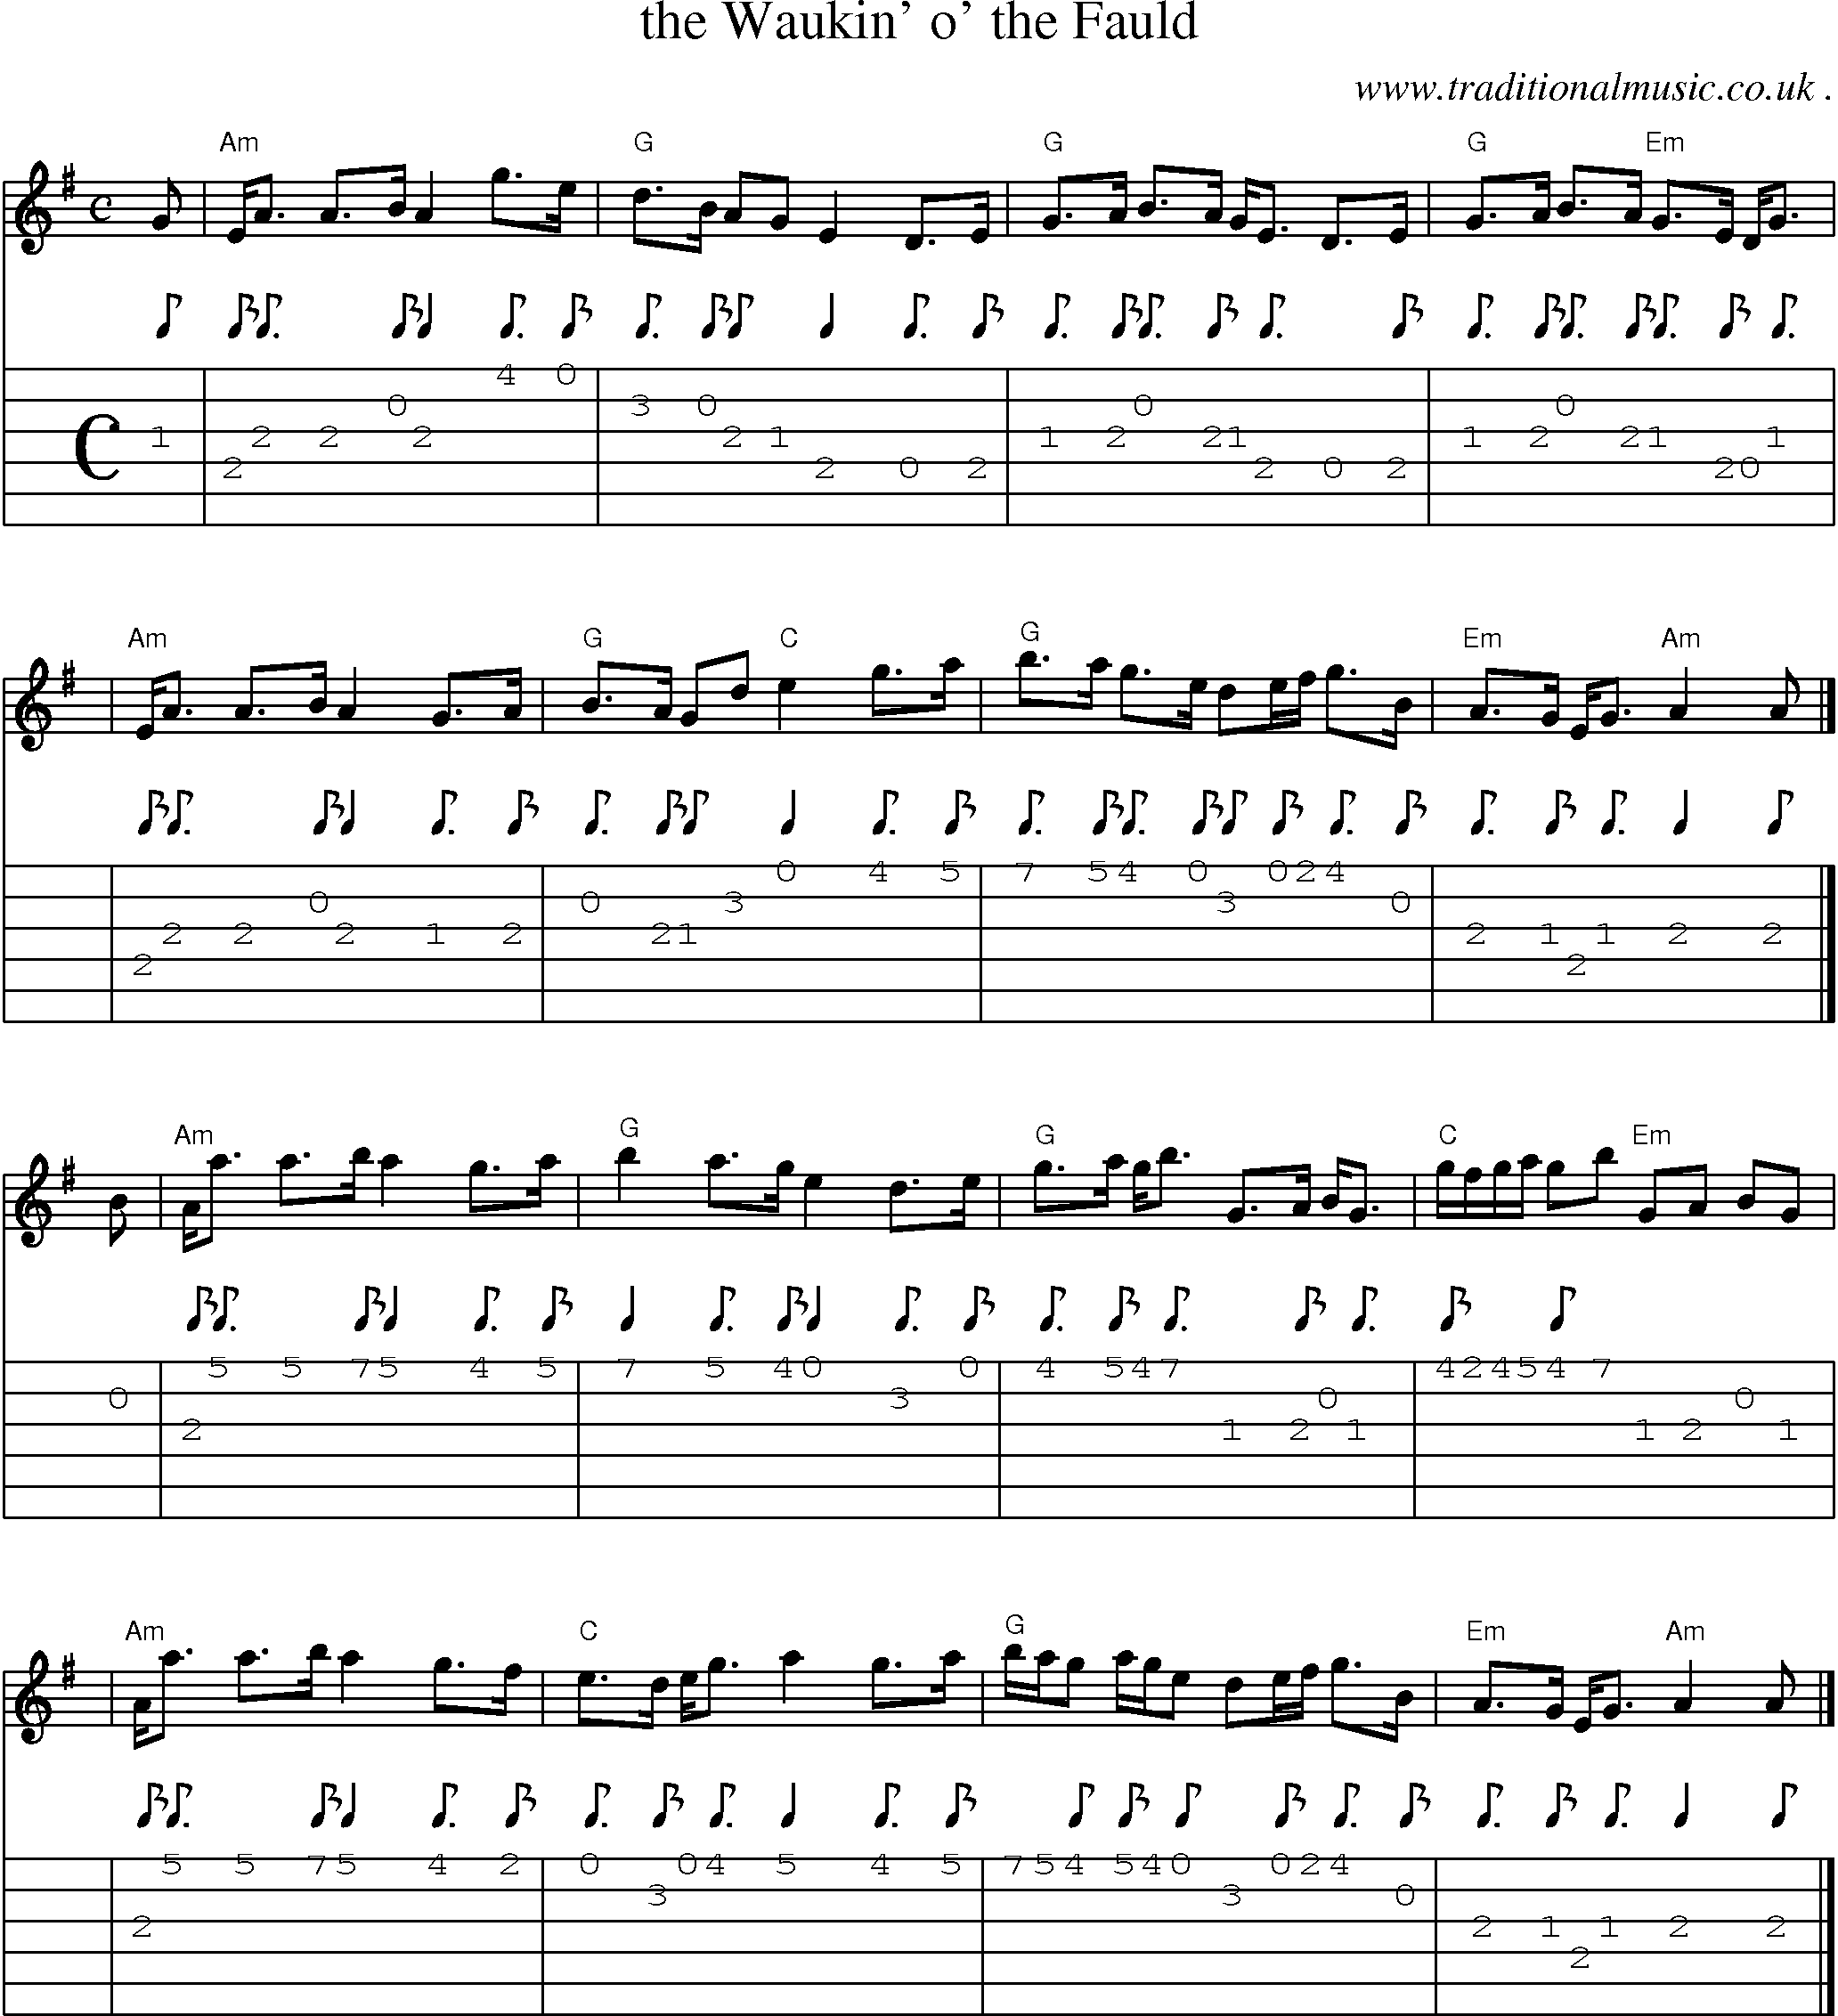 Sheet-music  score, Chords and Guitar Tabs for The Waukin O The Fauld